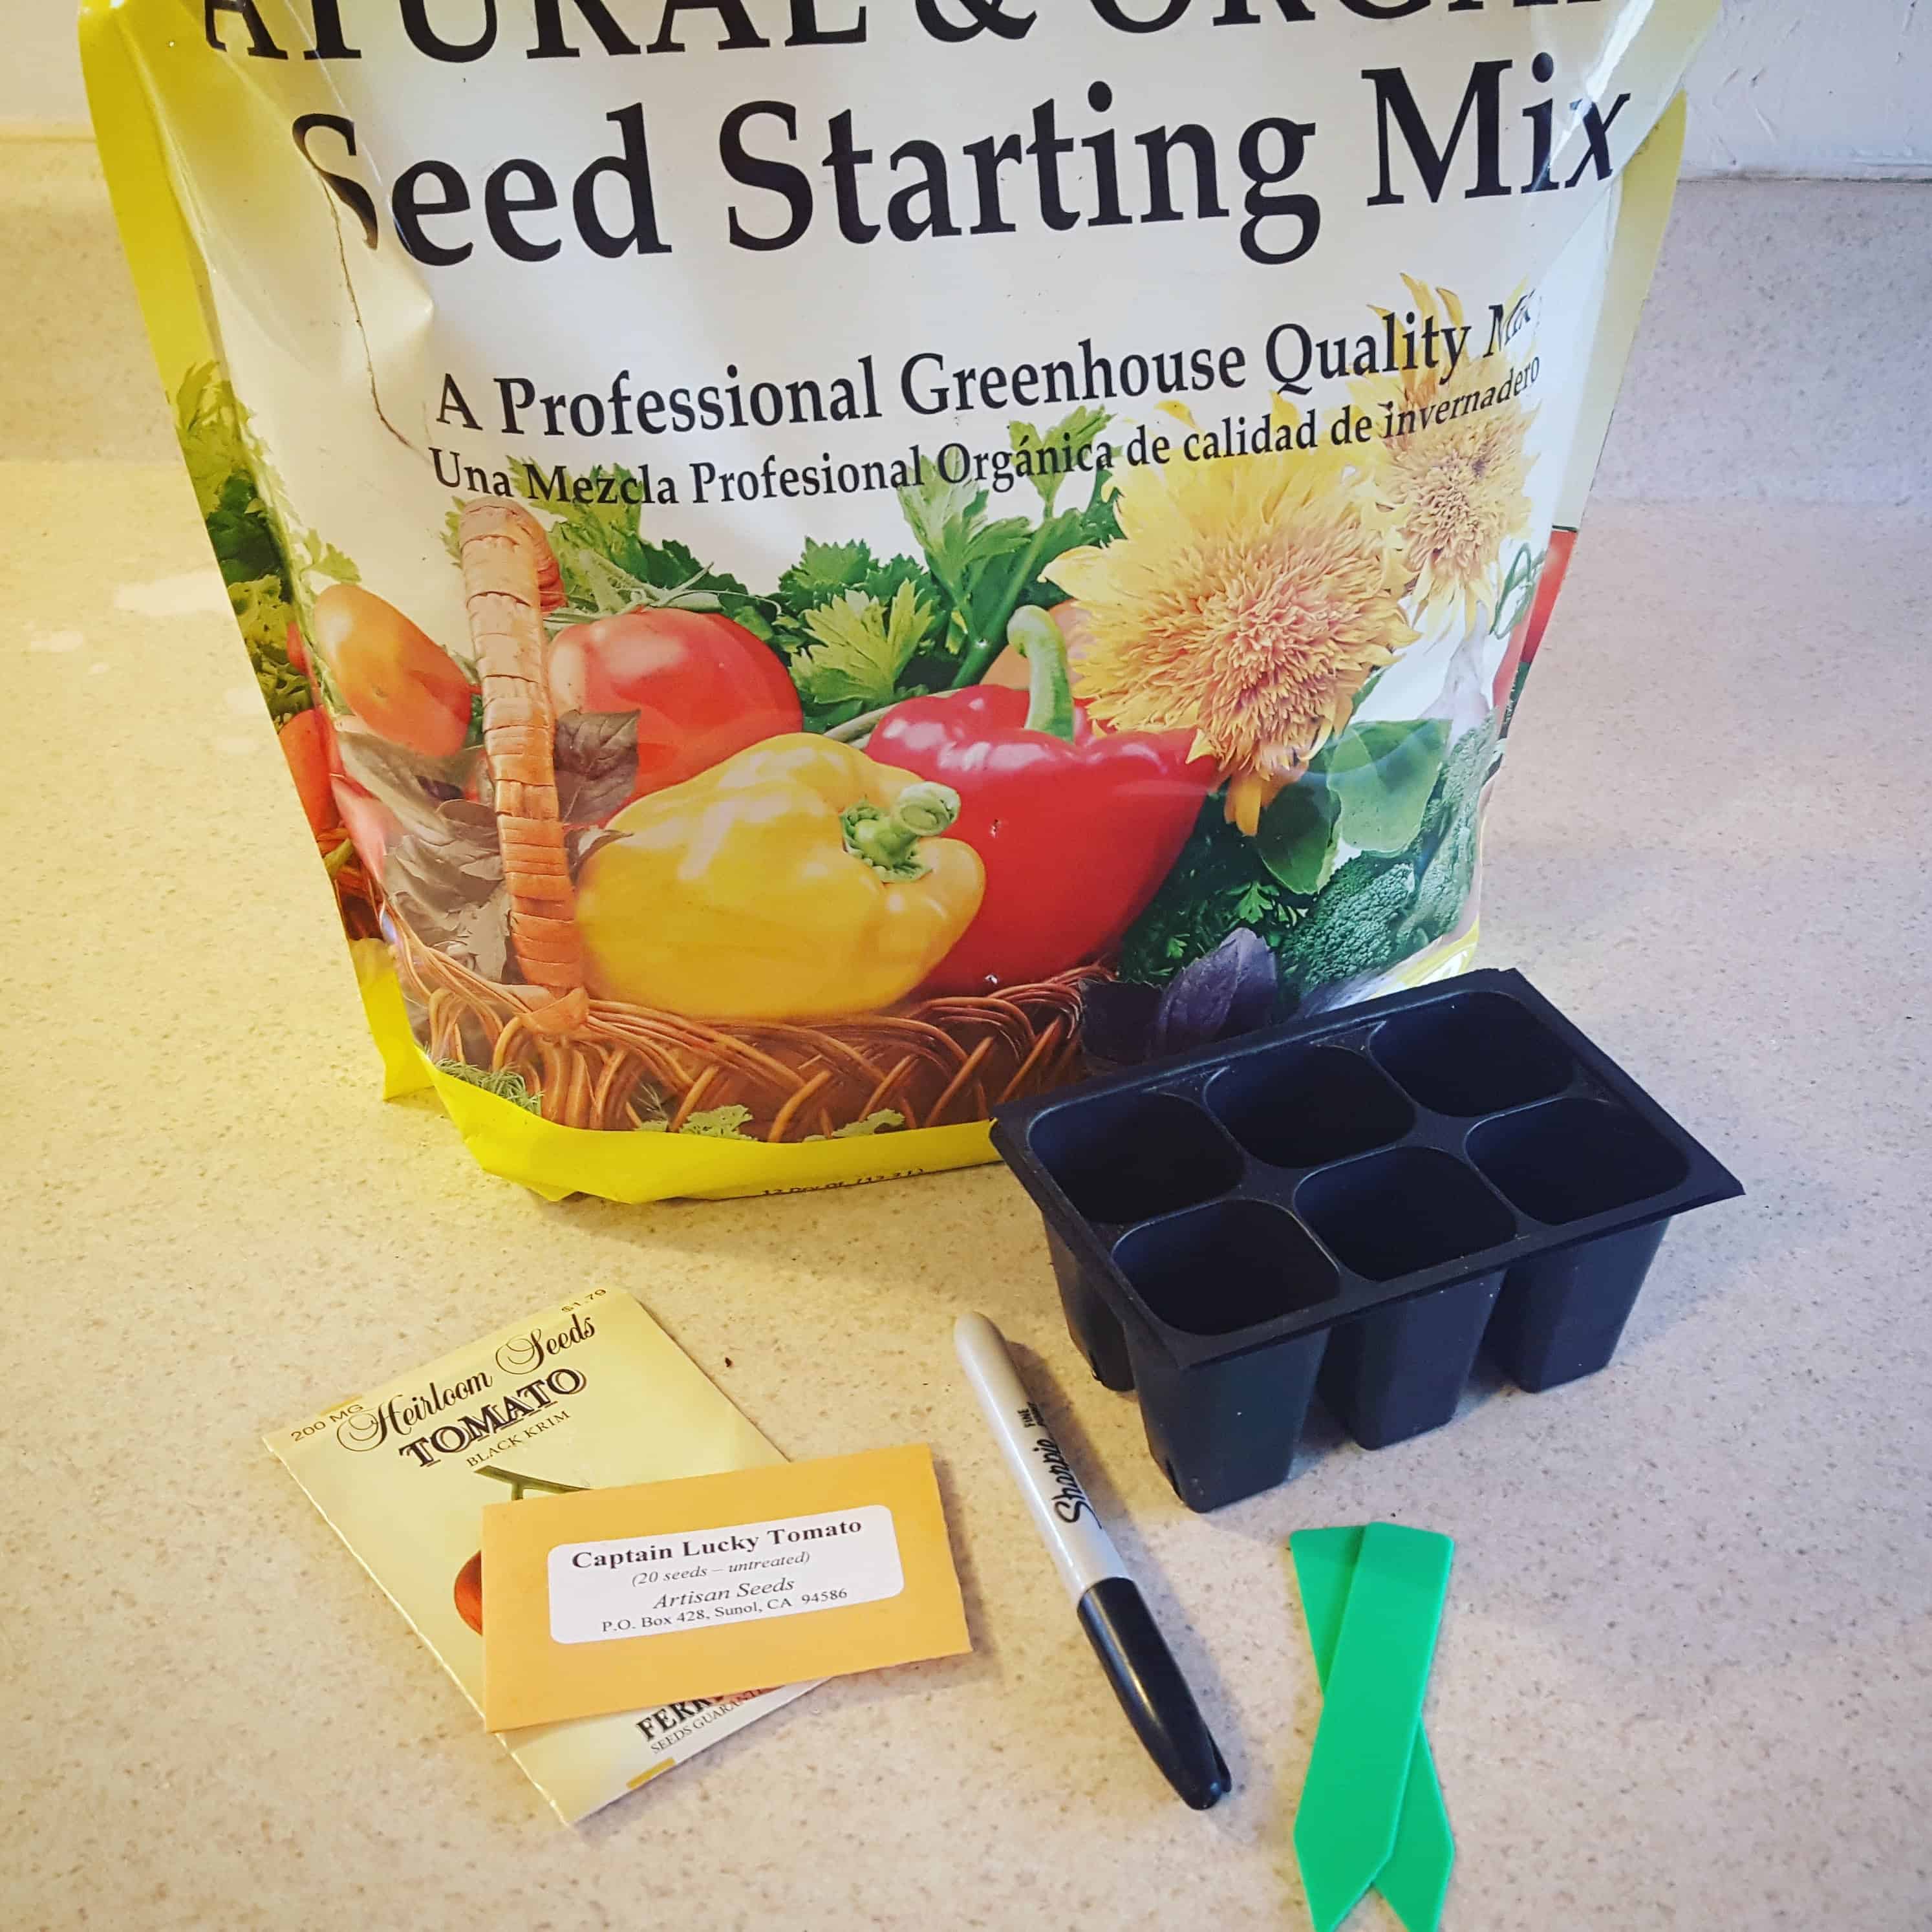 Gathering supplies to start tomatoes from seed.